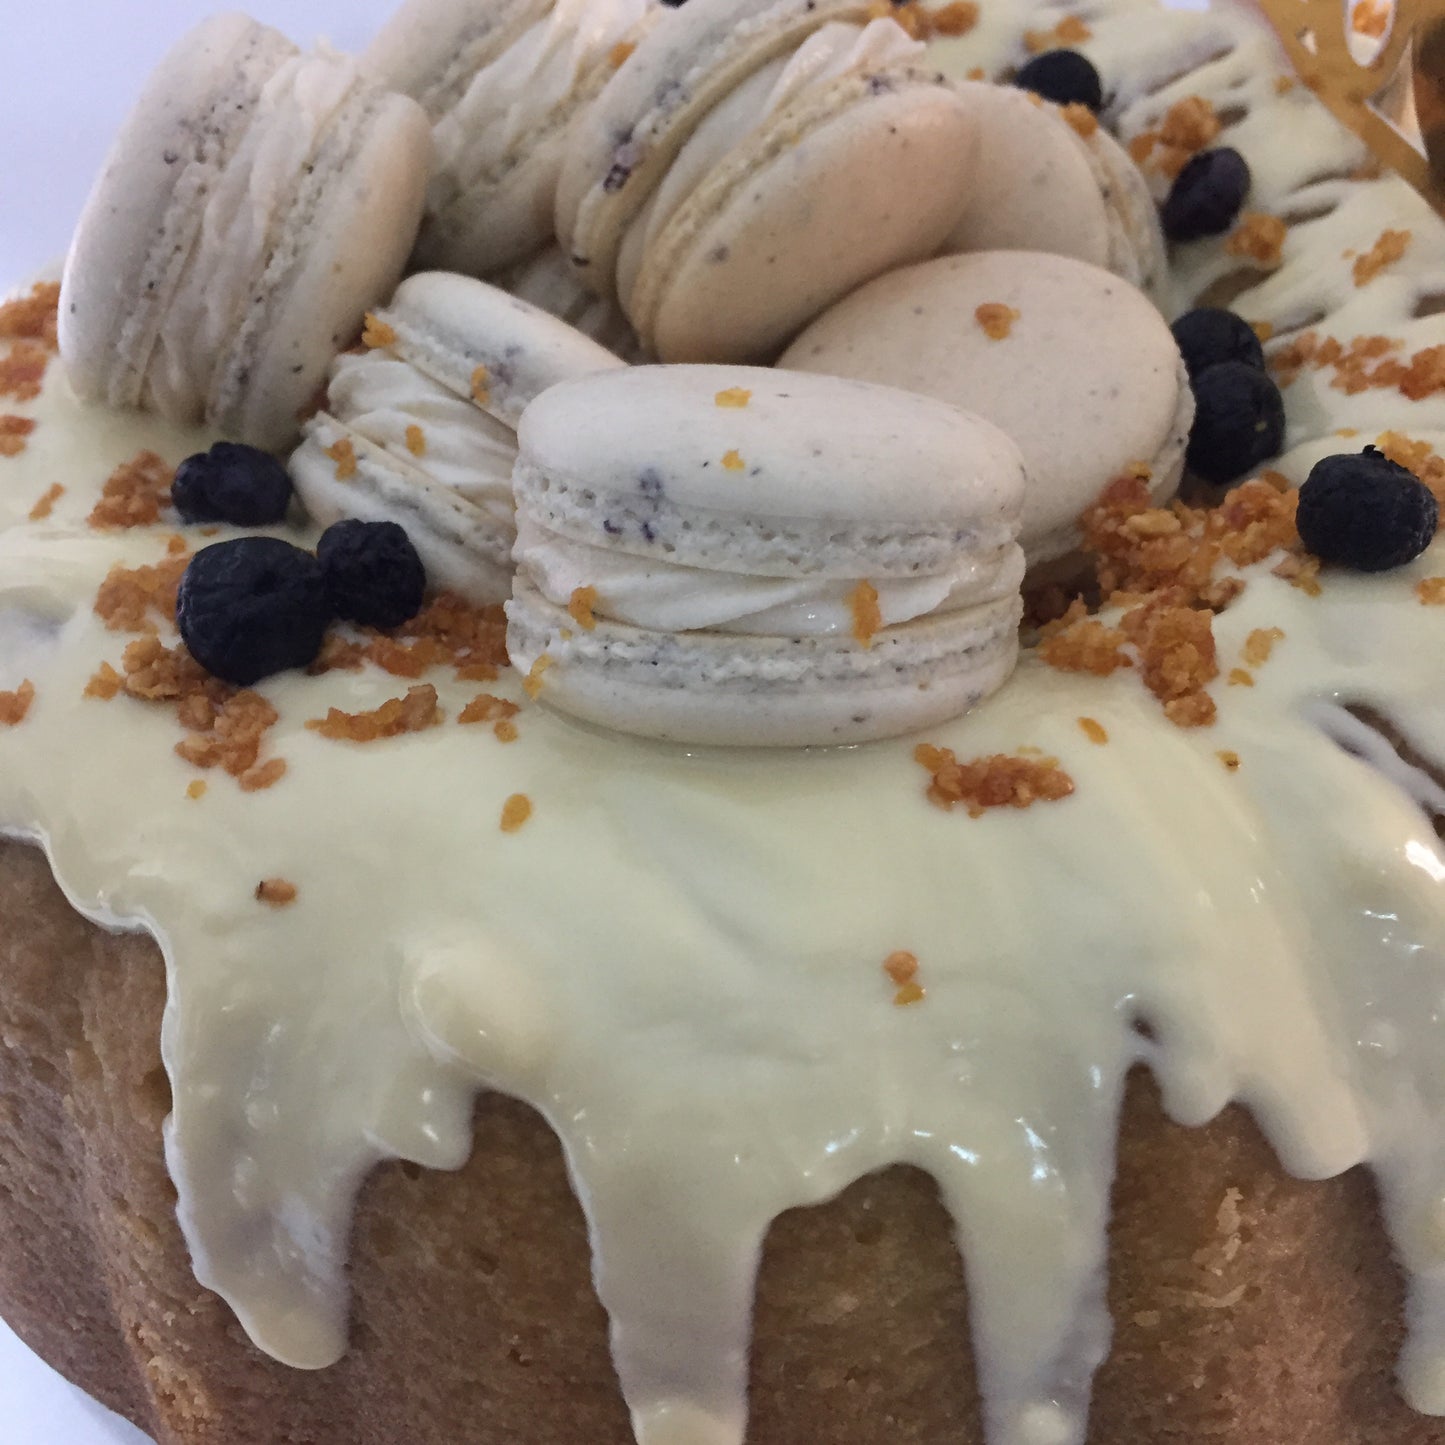 “How do you want it?”: Build Your Own Standard Bundt Cake